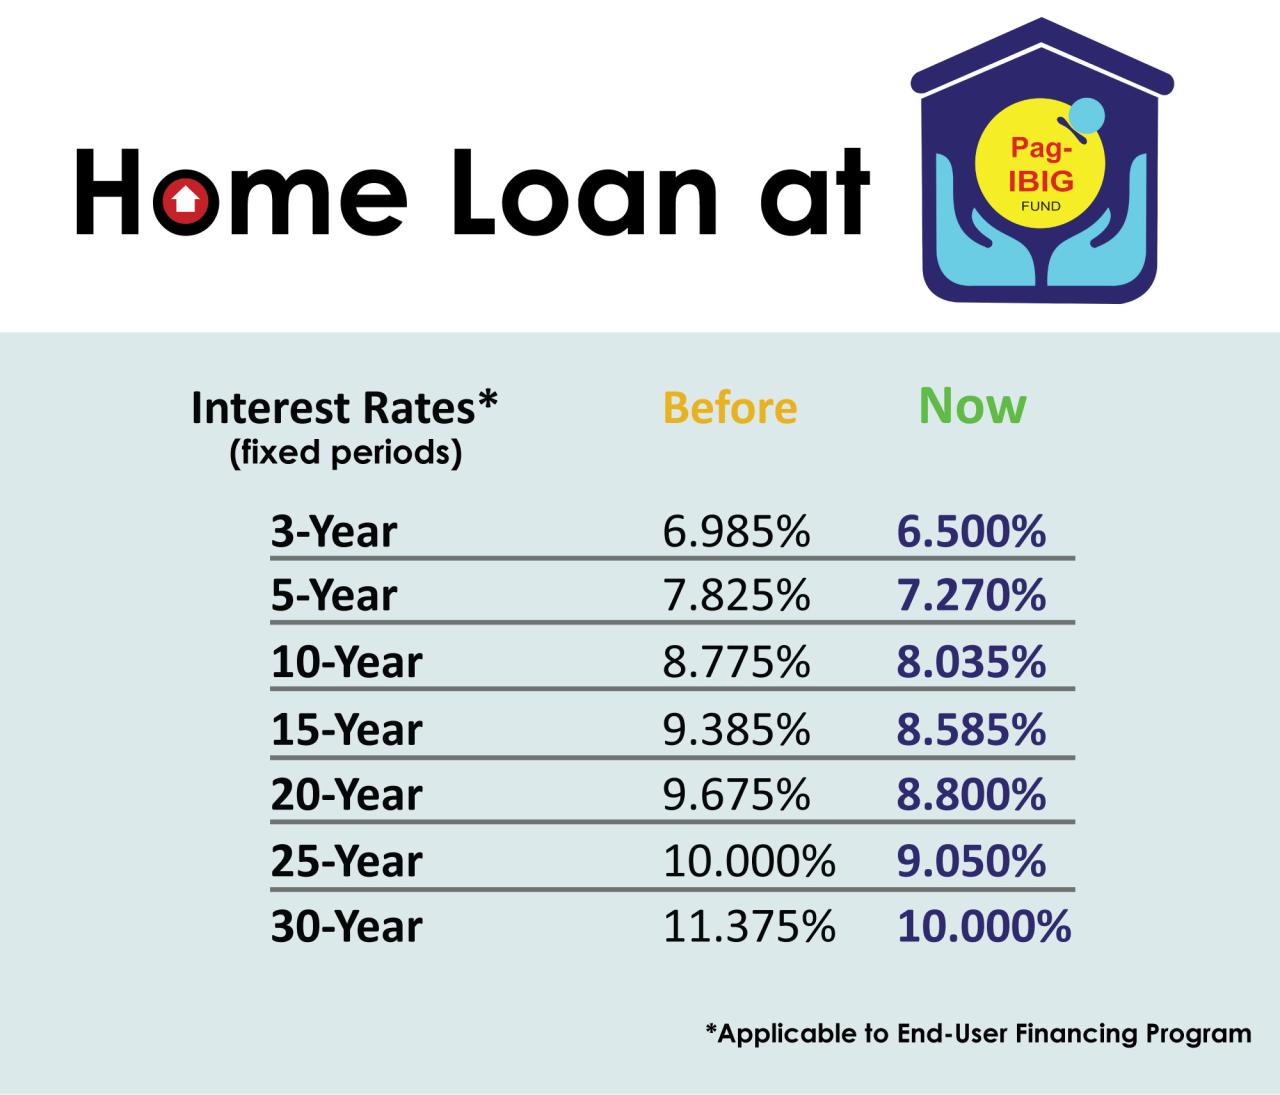 Bank housing loan and Pagibig loan Personal Investing and Money